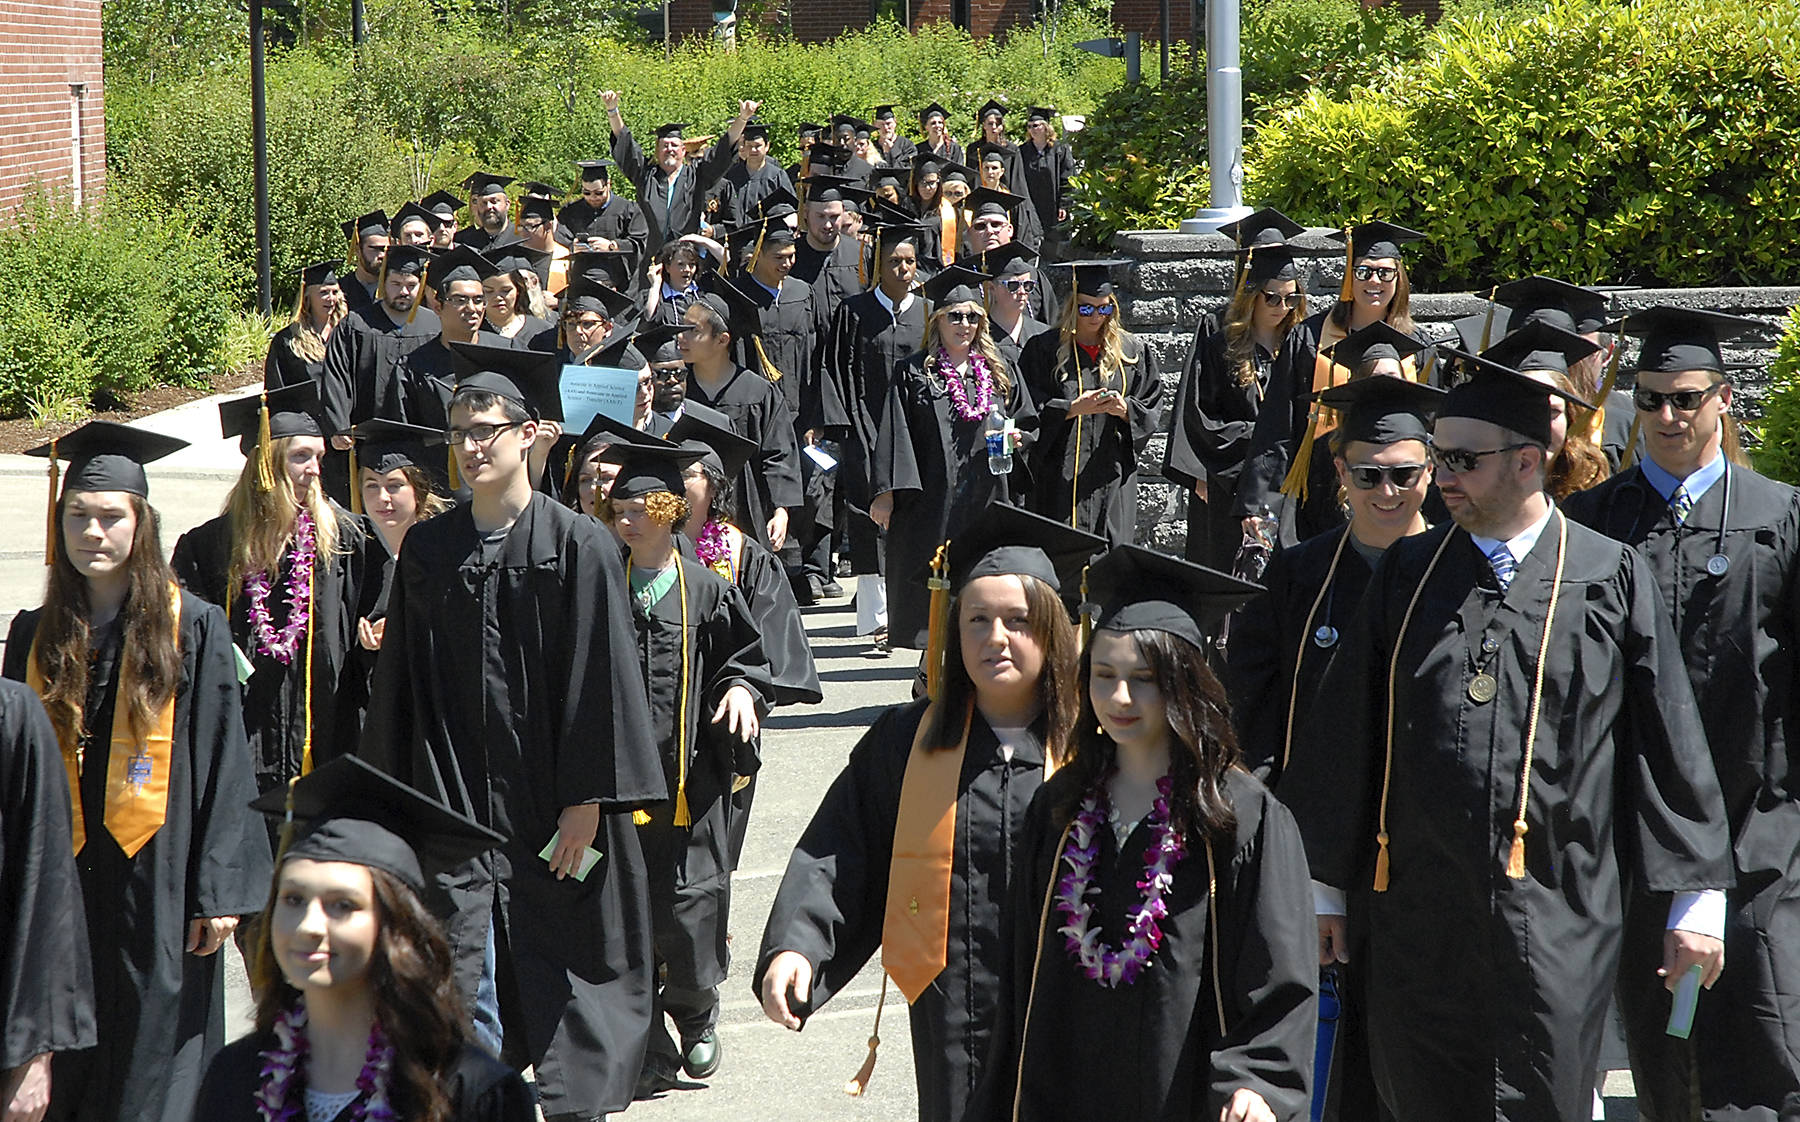 Students march to commencement ceremonies on the Port Angeles campus of Peninsula College in 2017. File photo by Keith Thorpe/Olympic Peninsula News Group